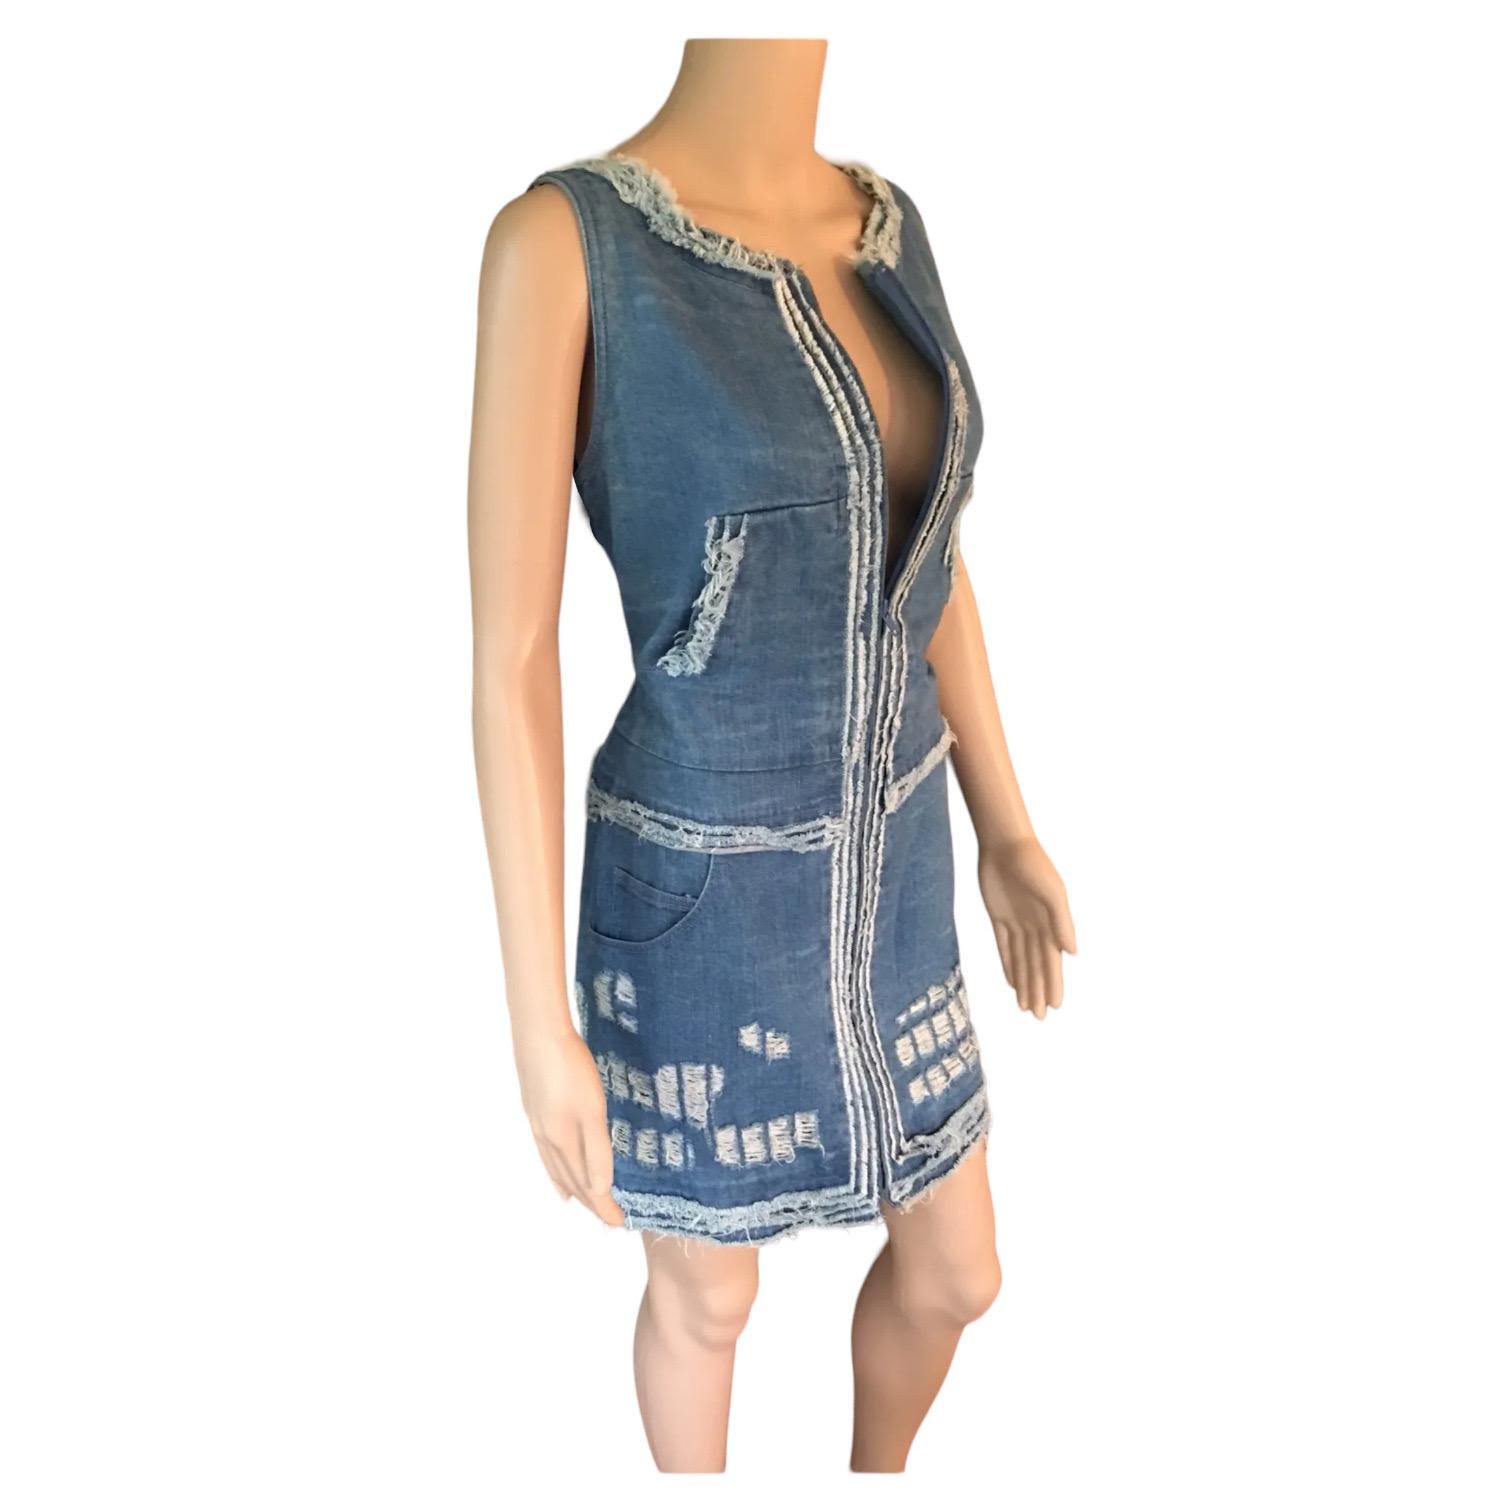 Chanel F/W 2008 Runway Distressed Denim Front Zipper Dress

Look 7 from the Fall 2008 Runway. 

Light wash blue Chanel denim sleeveless mini dress with tiered raw-edge contrast trim throughout, bateau neckline, silver-tone frayed adornment at skirt,